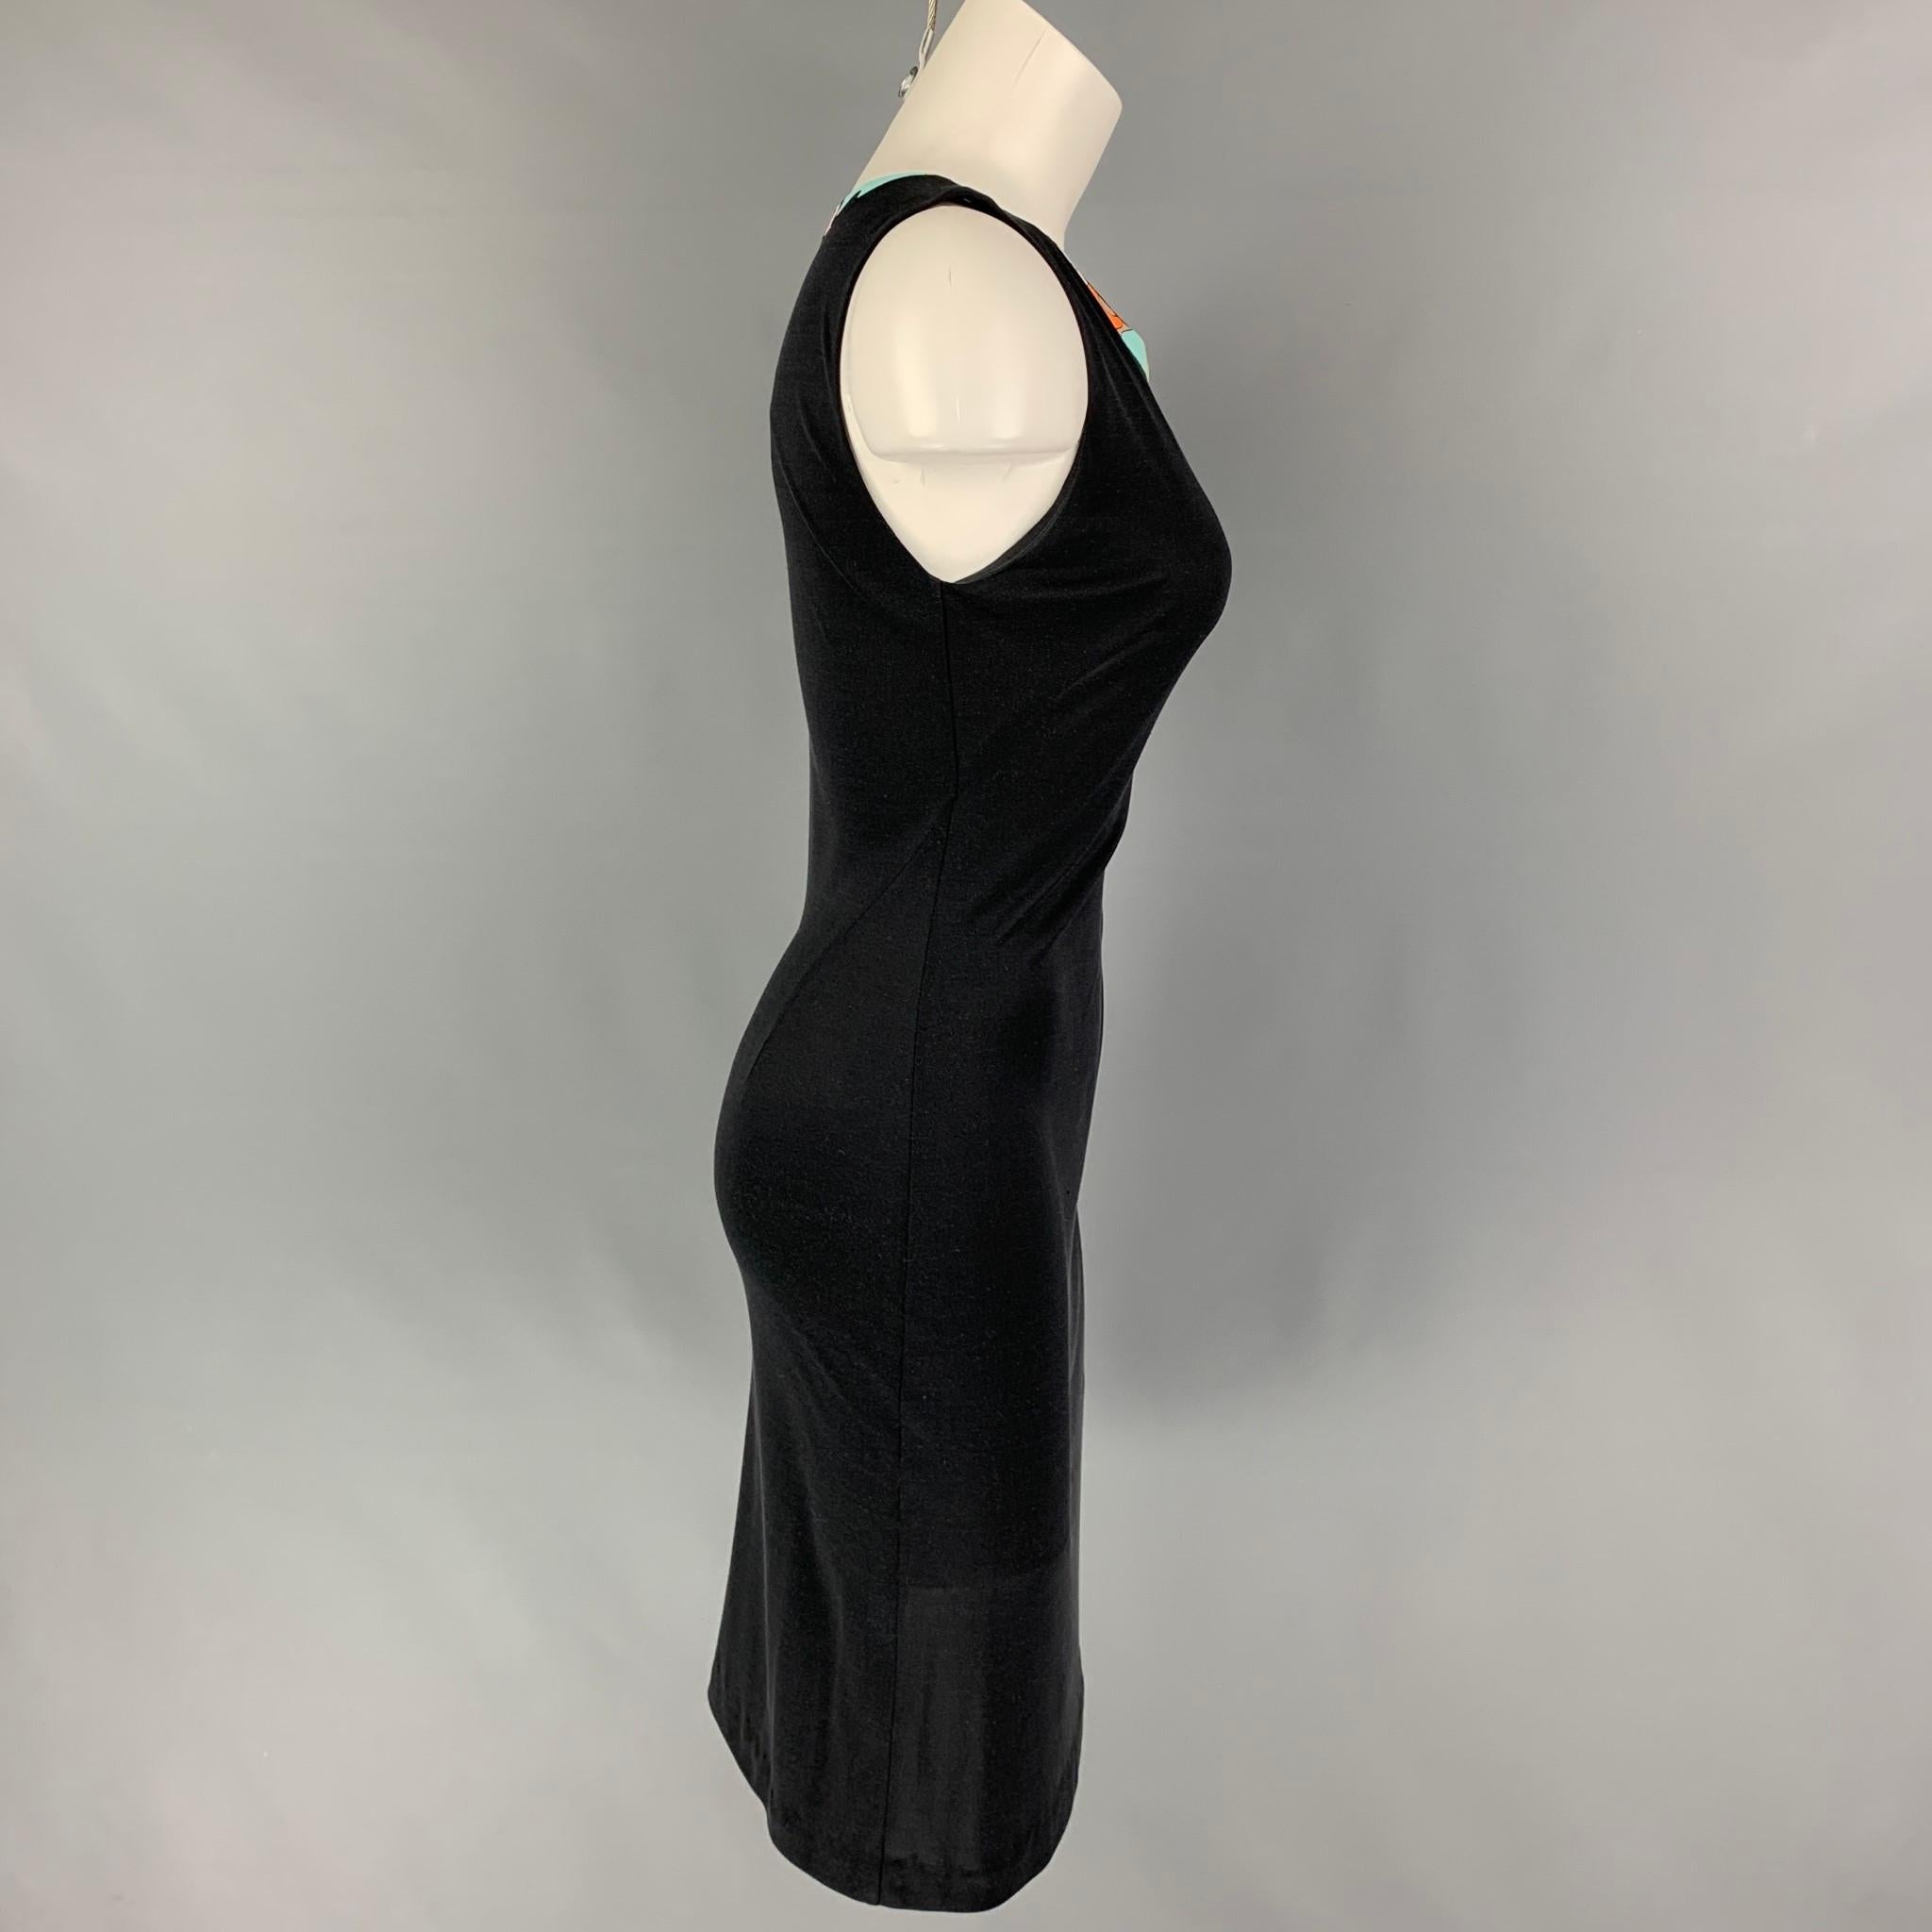 EMILIO PUCCI dress comes in a black silk with a multi-color abstract trim featuring a sleeveless style. Made in Italy. 

Very Good Pre-Owned Condition.
Marked: I 42 / F 38 / USA 8 / UK 10

Measurements:

Shoulder: 13 in.
Bust: 30 in.
Waist: 26